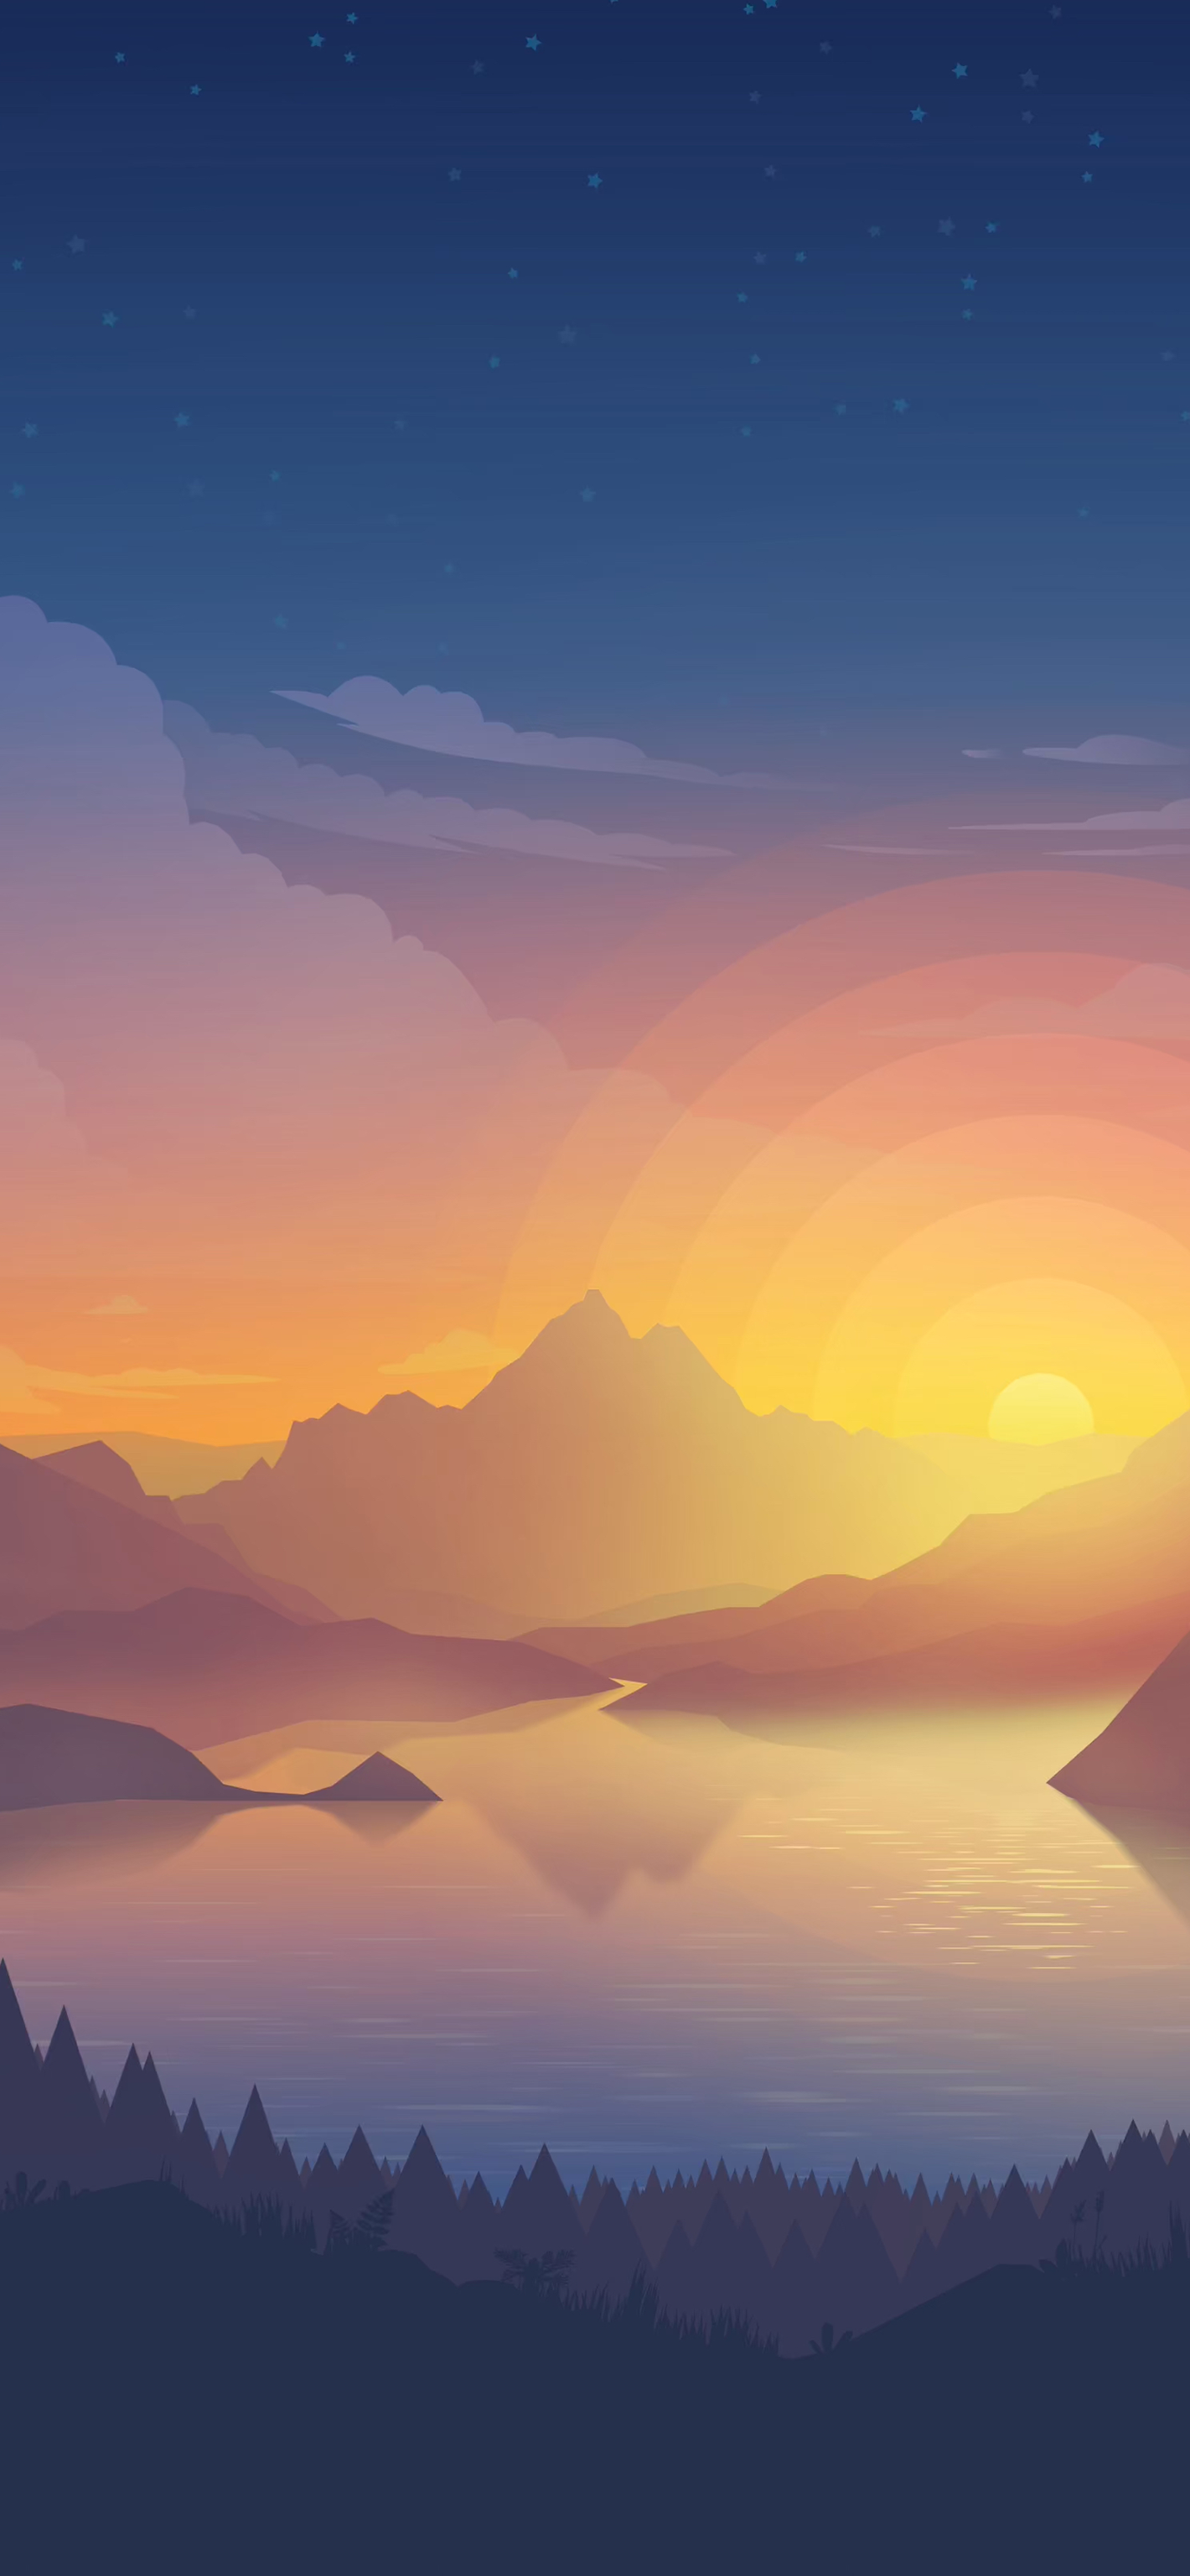 Vector Landscape Our First Dynamic Wallpaper For Macos Mojave And Higher It Will Change Colors Every 2 Hours Wallpapers Central